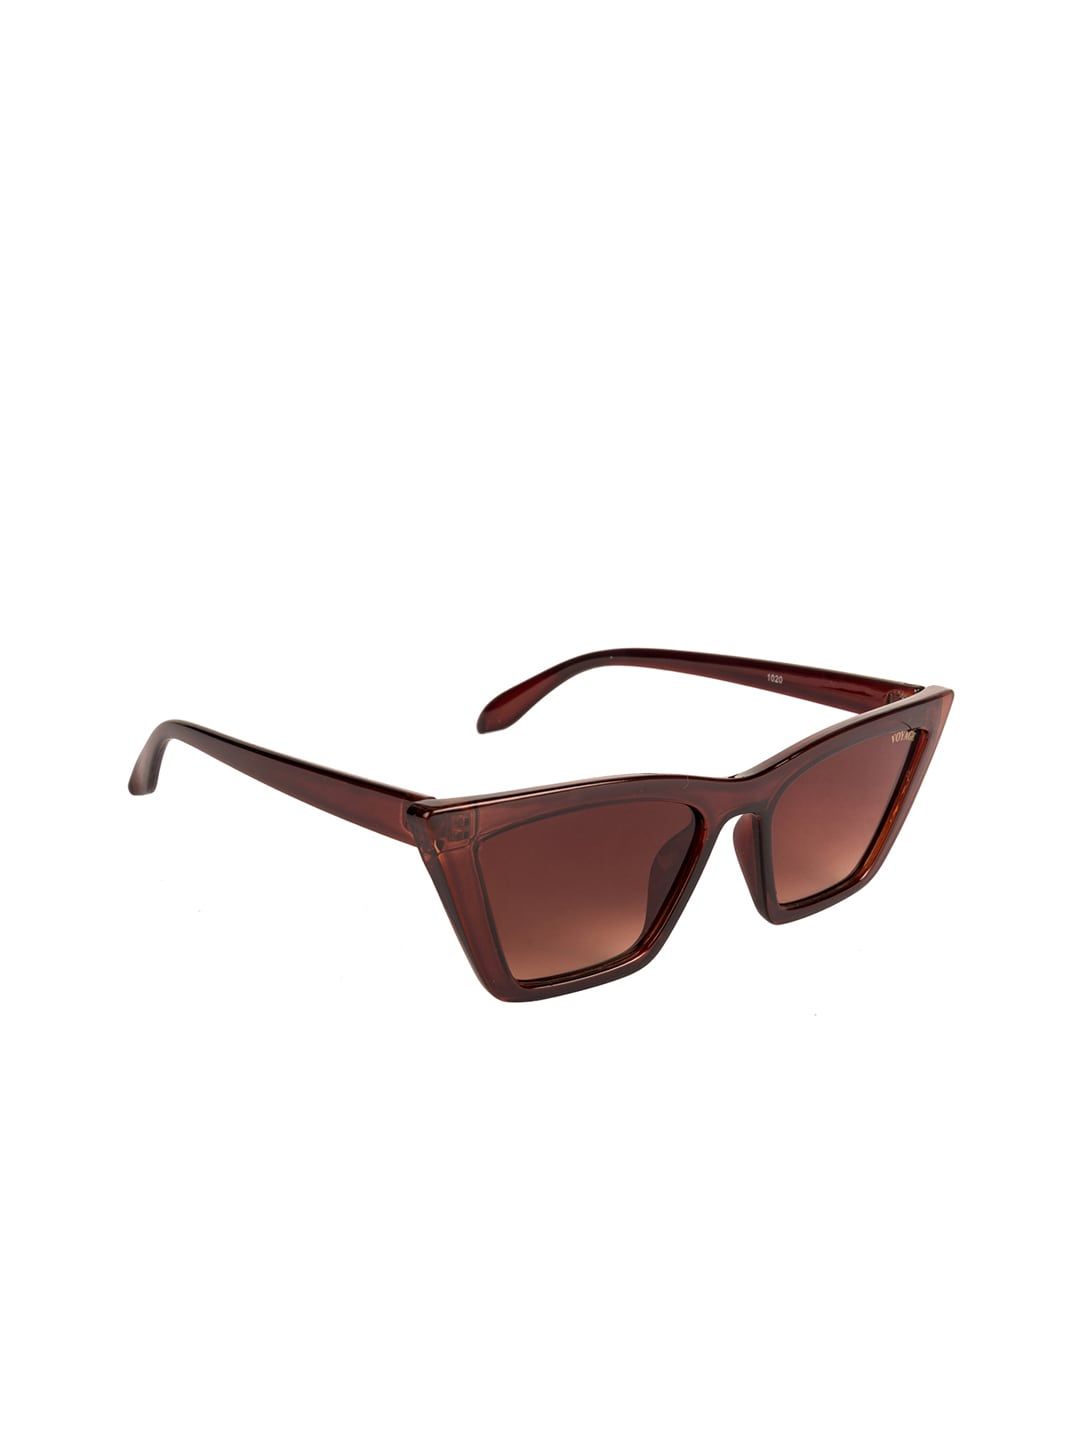 Voyage Women Cateye UV Protected Sunglasses 1020MG3296 Price in India